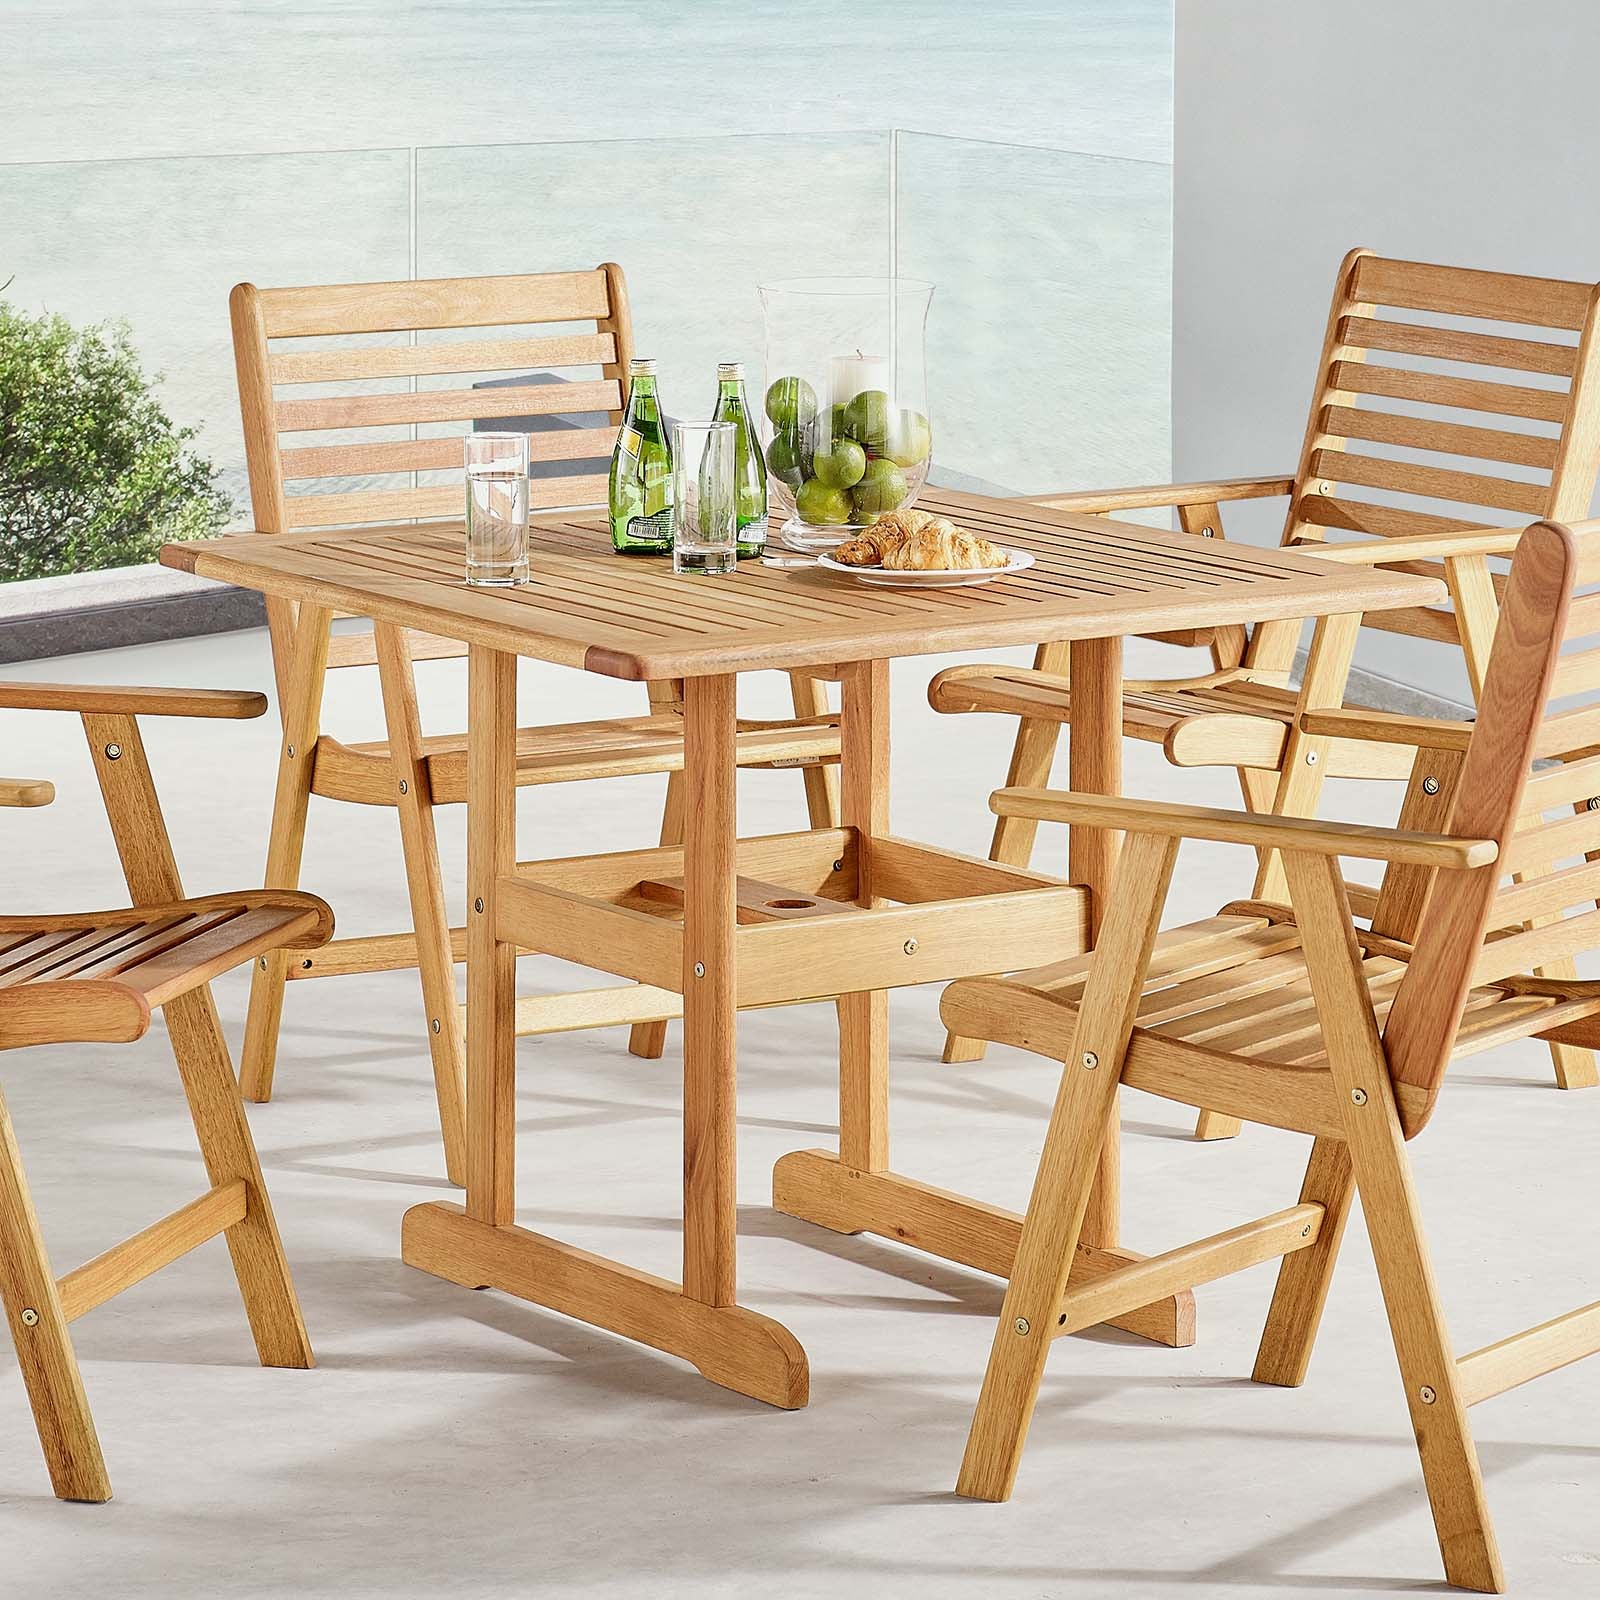 Hatteras 36" Square Outdoor Patio Eucalyptus Wood Dining Table - East Shore Modern Home Furnishings